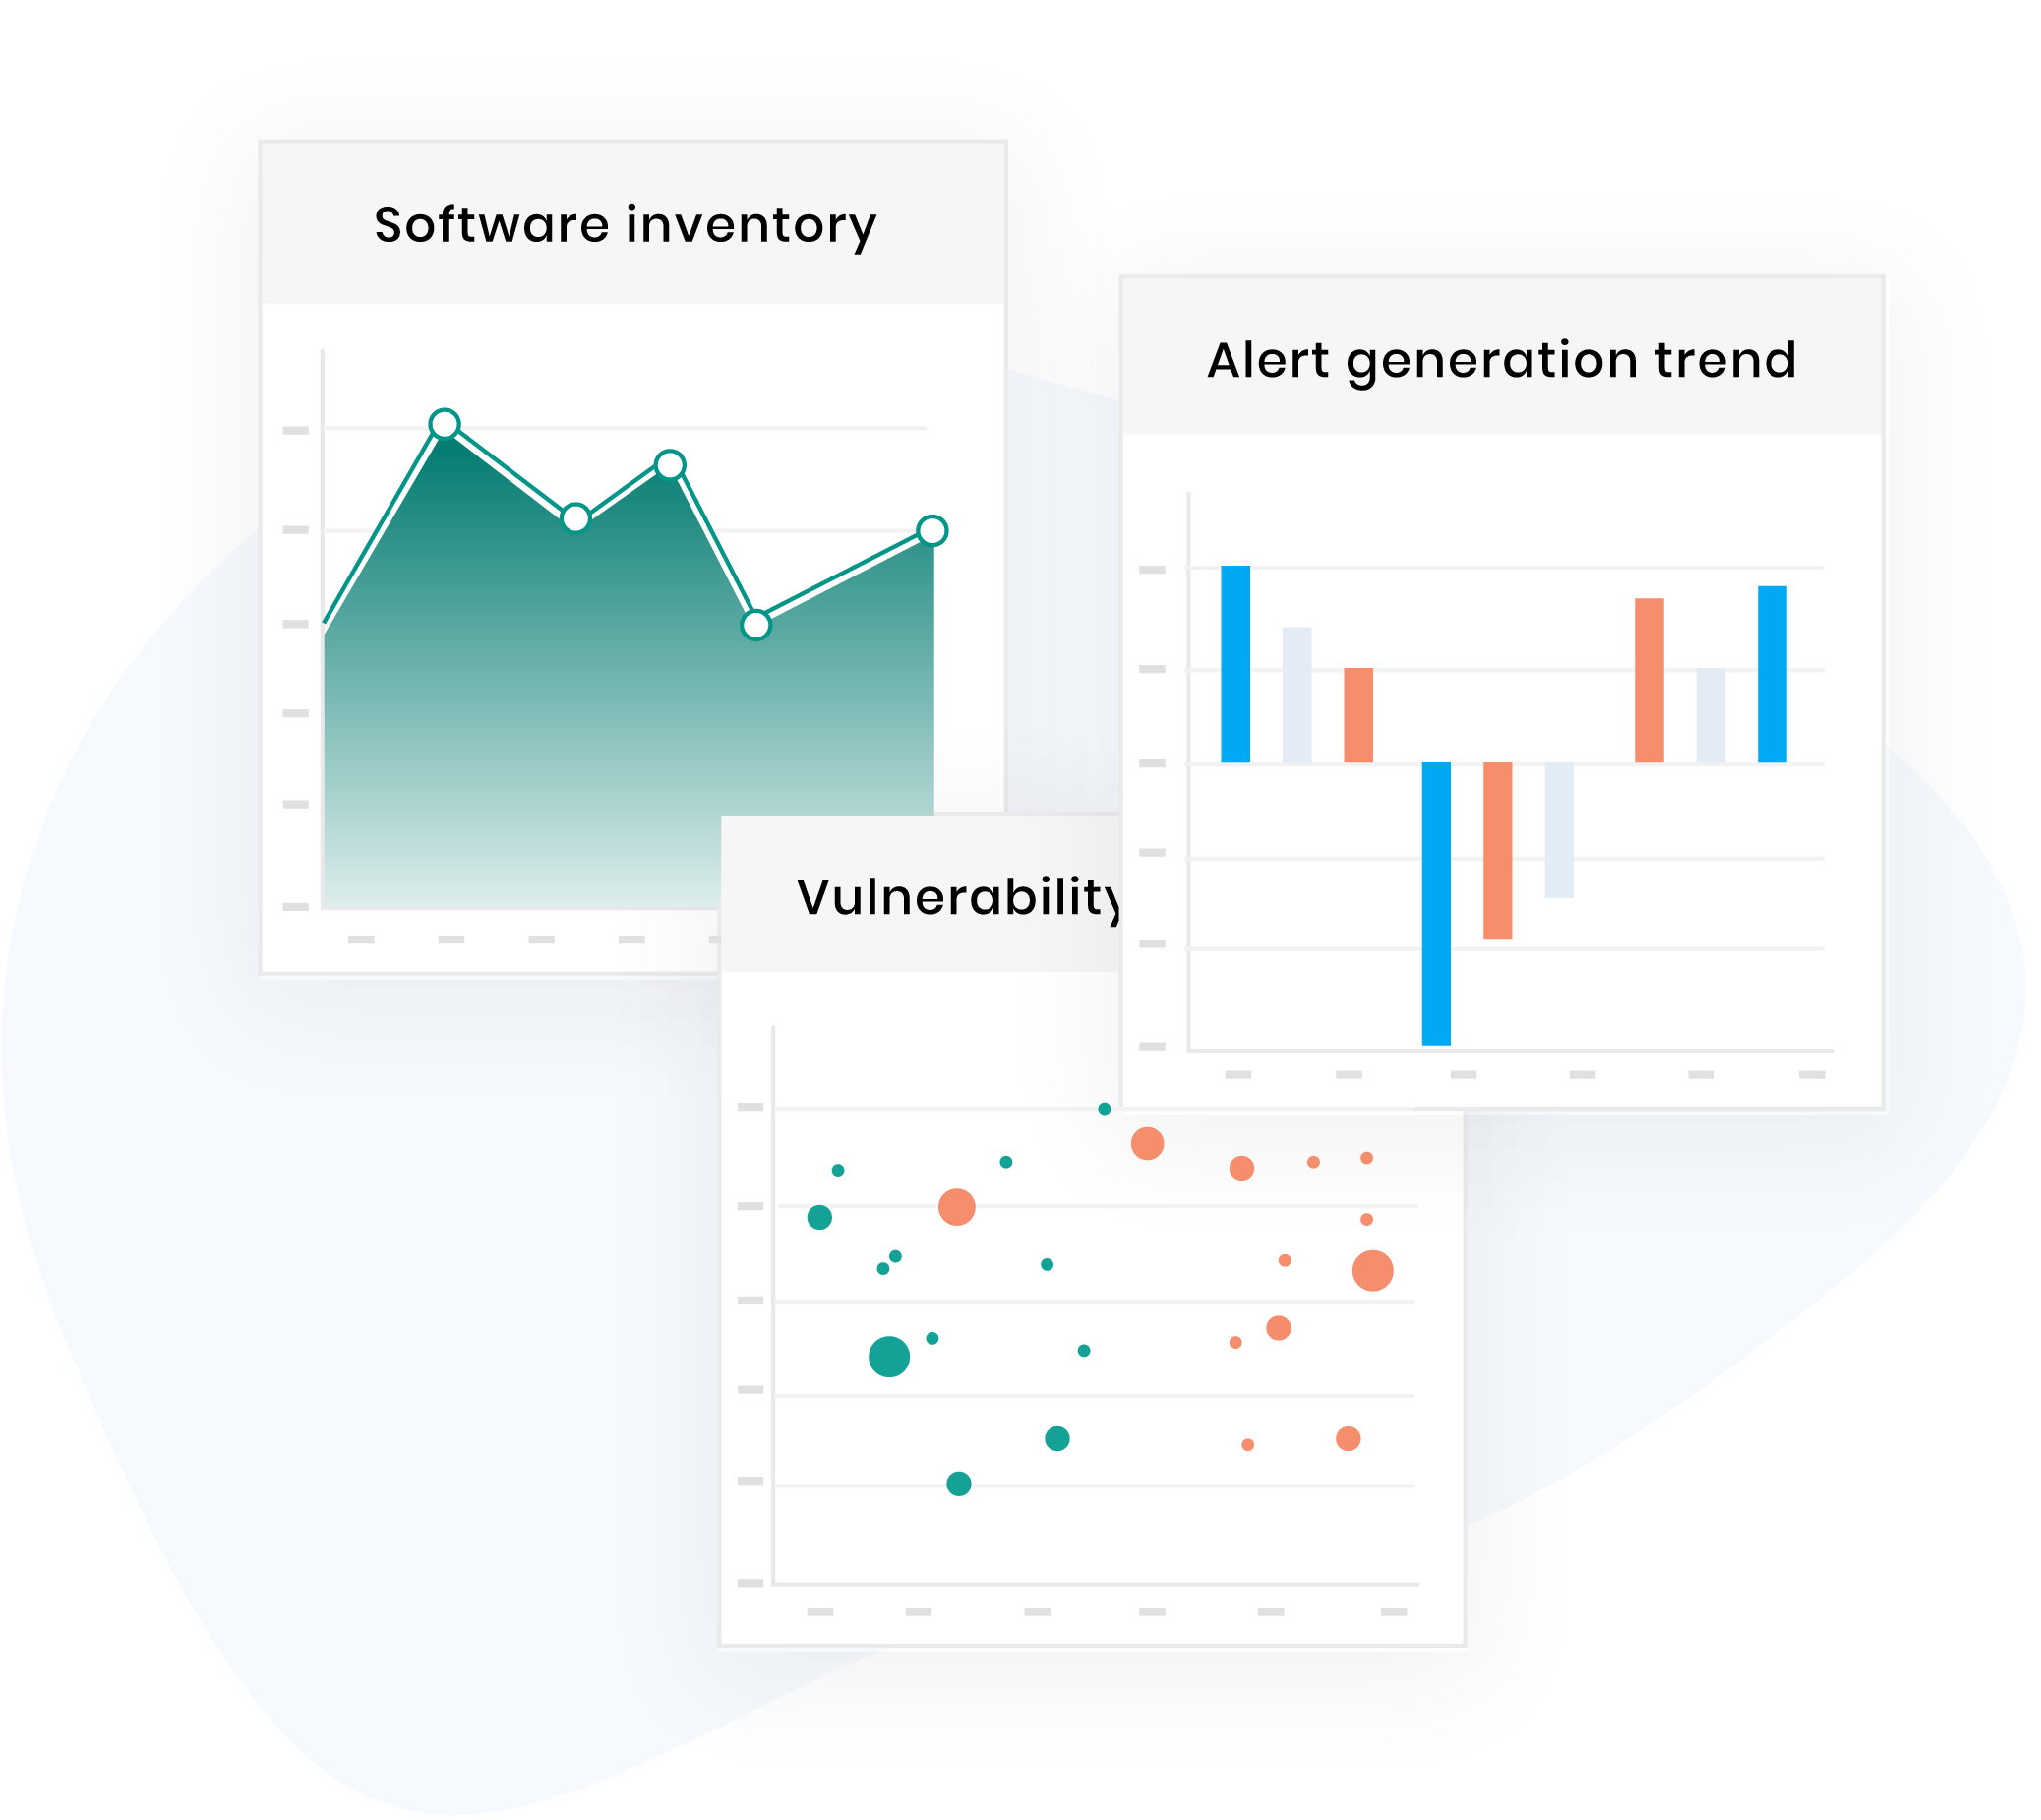 Unified inventory analytics to secure your endpoints